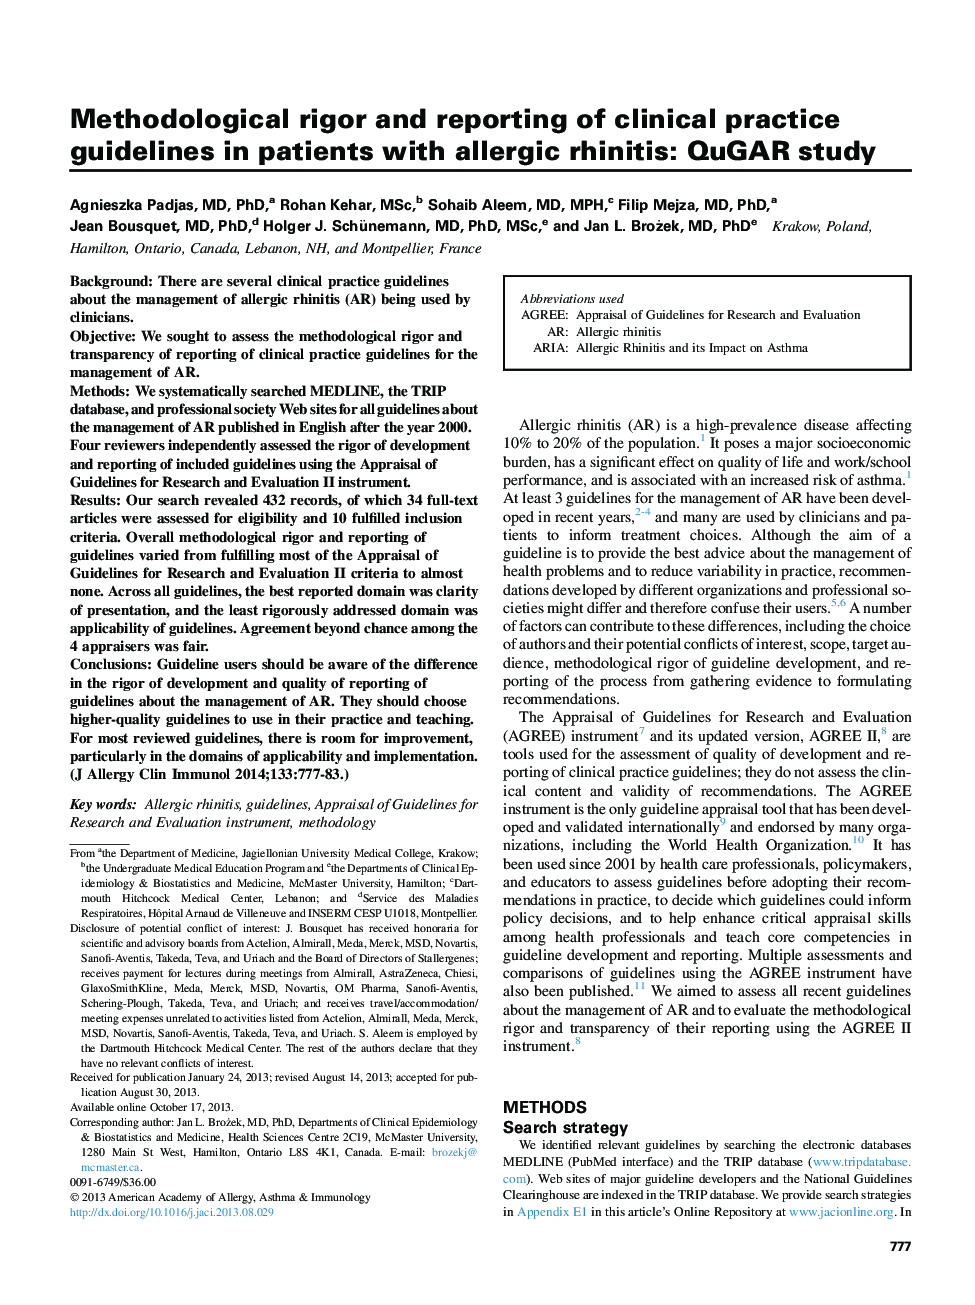 Rhinitis, sinusitis, and upper airway diseaseMethodological rigor and reporting of clinical practice guidelines in patients with allergic rhinitis: QuGAR study